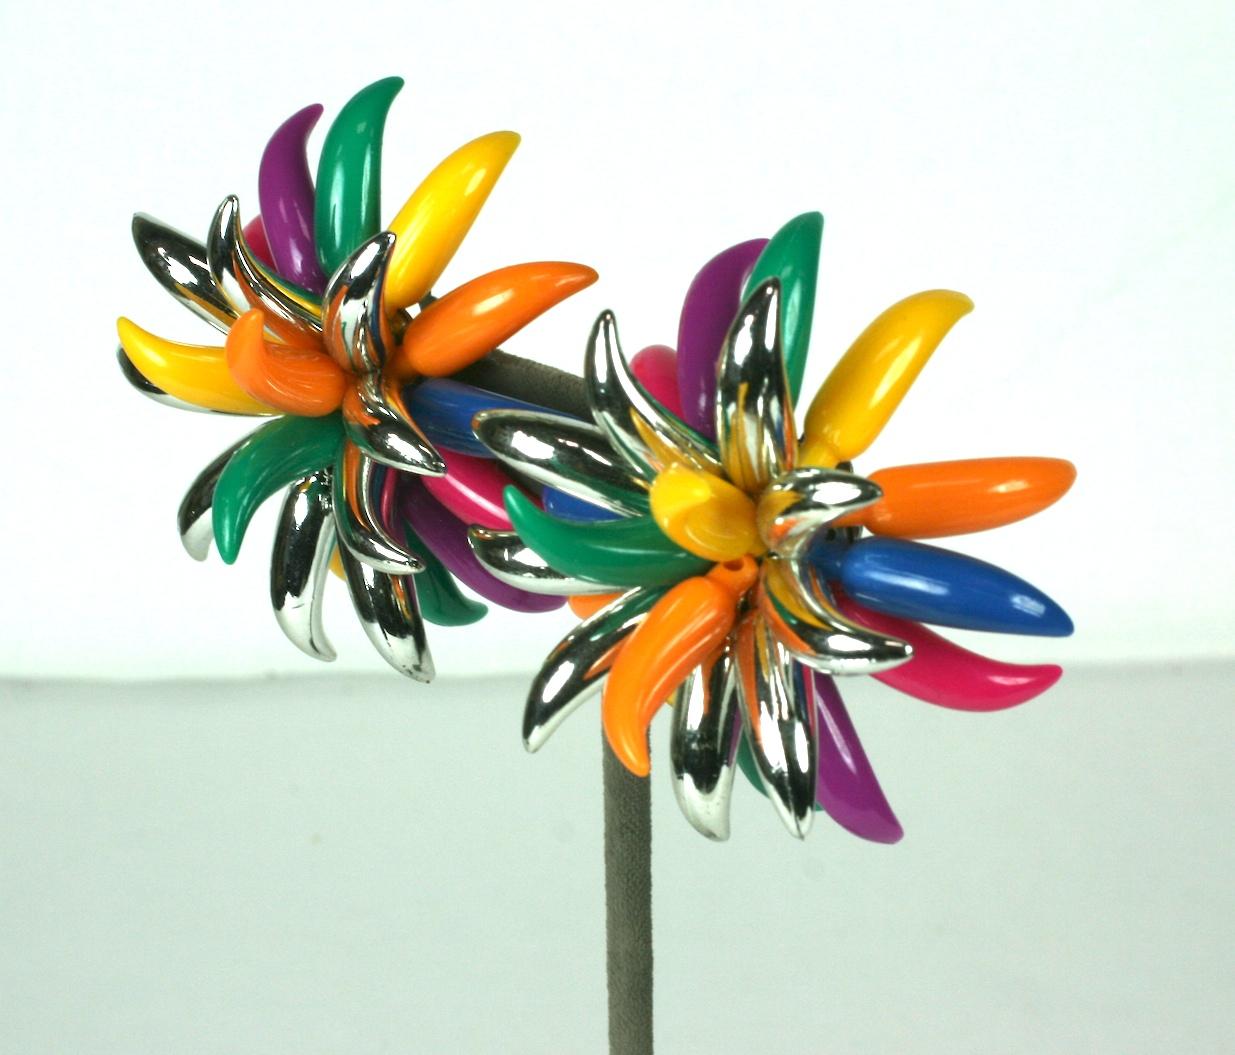 French flower spike multicolored resin and silver metallic clad earclips. Silvered metal clip back fittings. Huge striking scale.
Excellent Condition. Made in France
Length 2.75
Width 2.75
Height 1.75